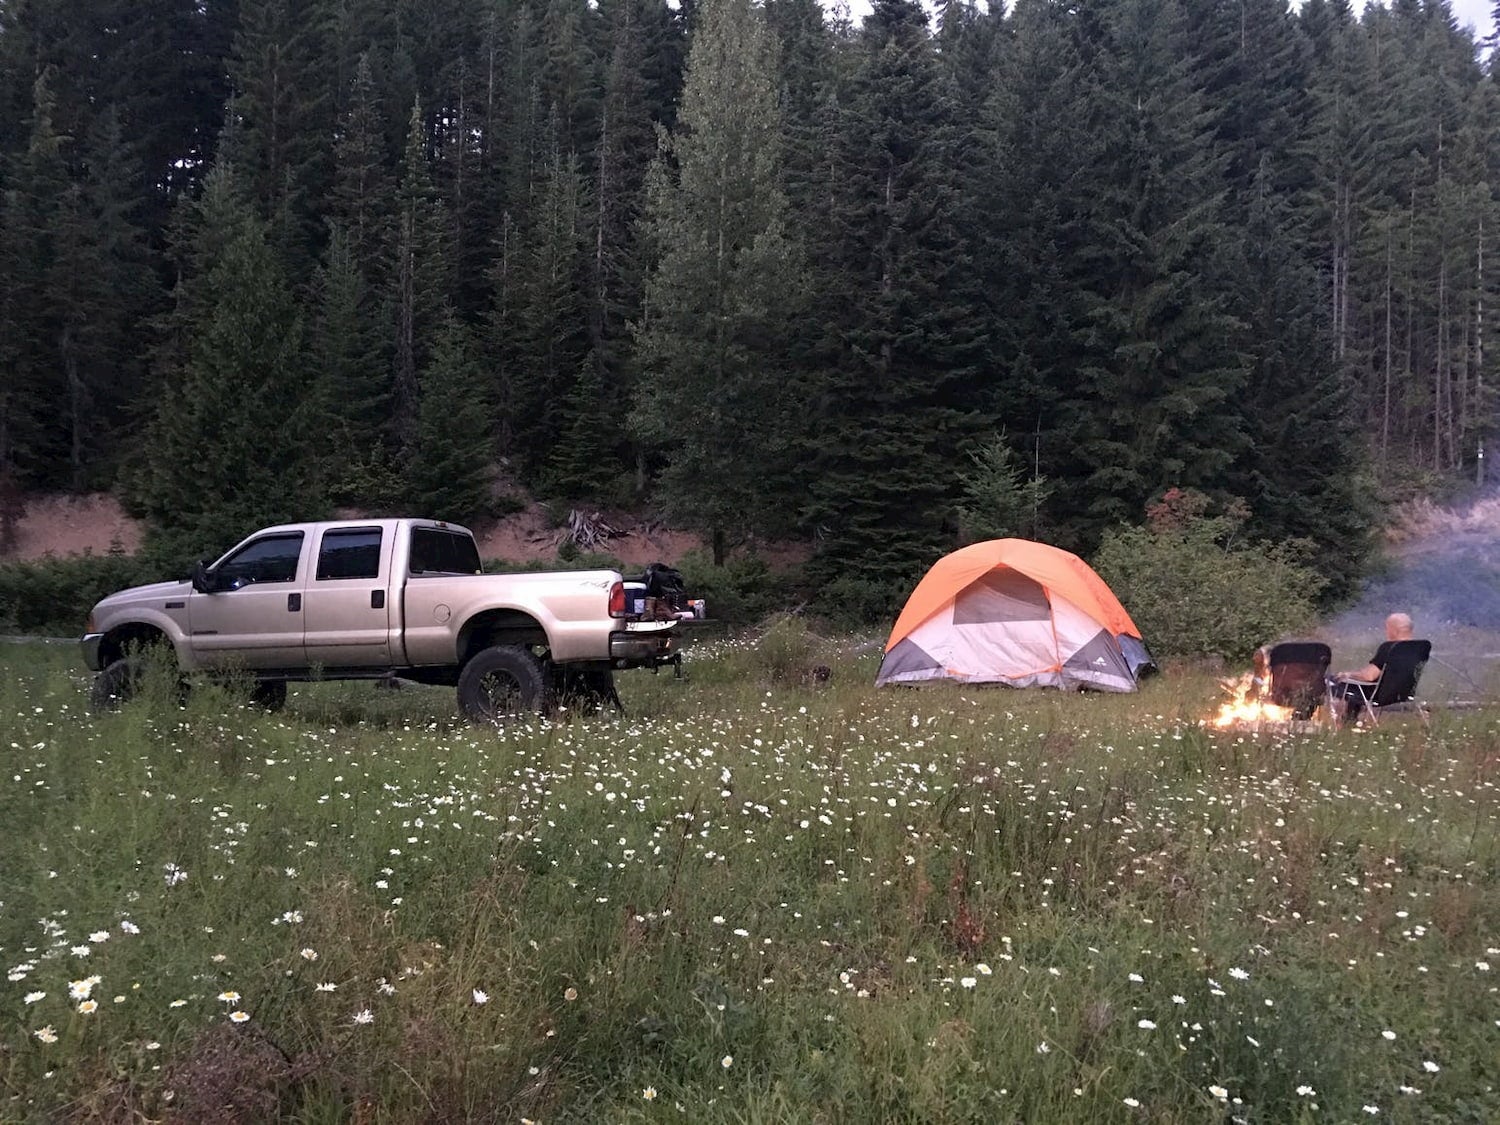 camp set up in field